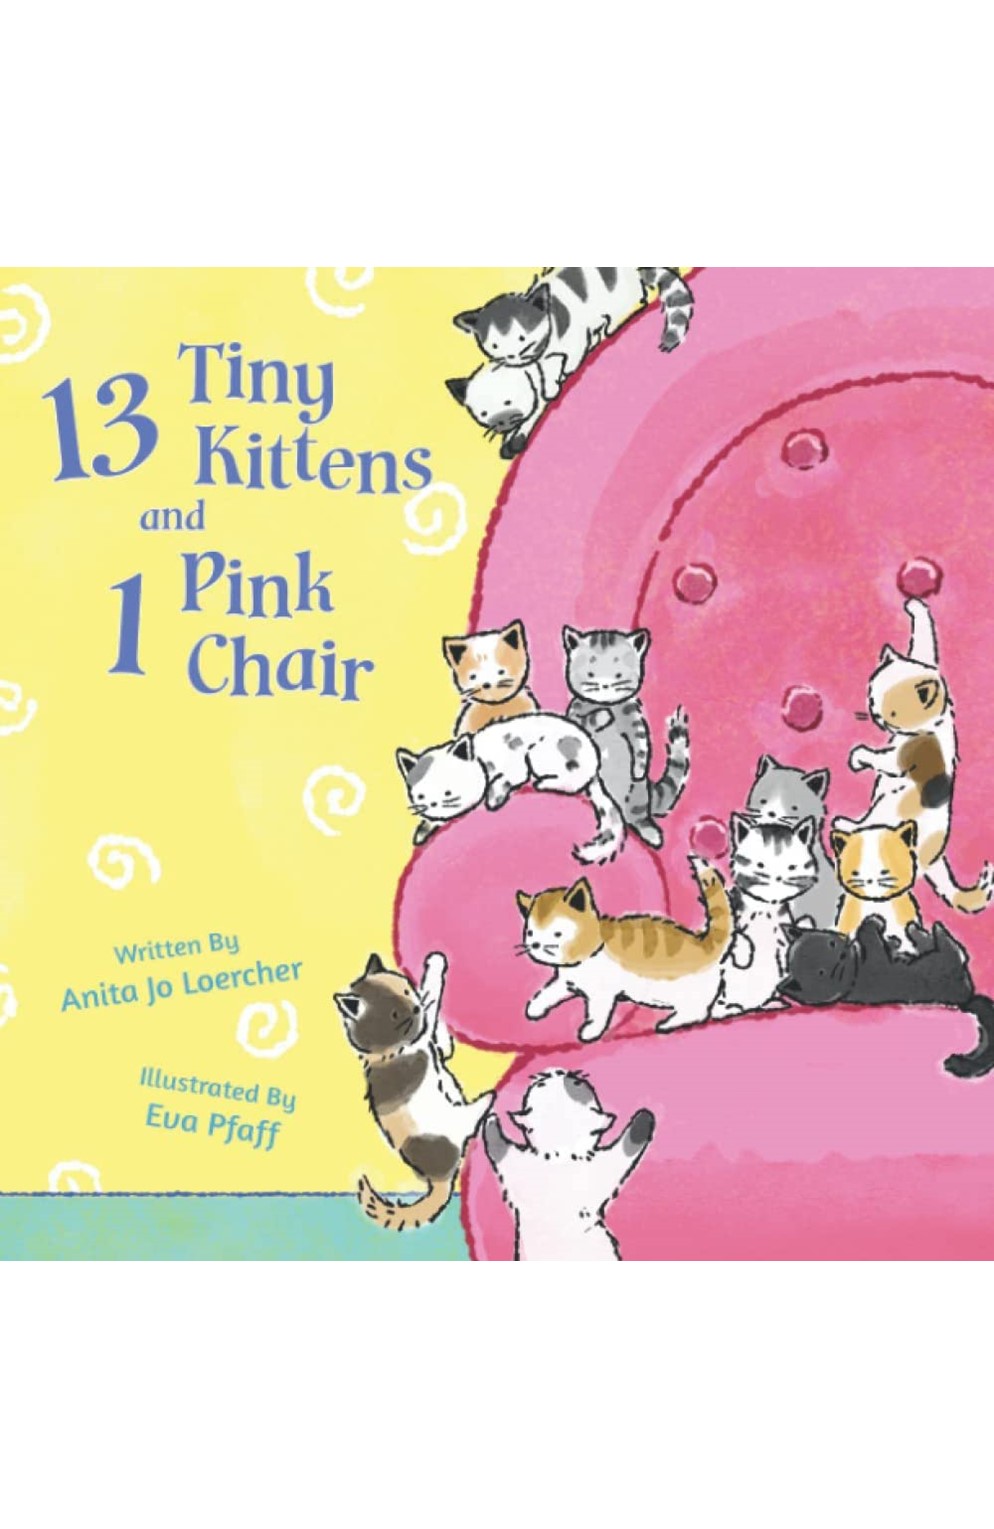 13 Tiny Kittens And 1 Pink Chair